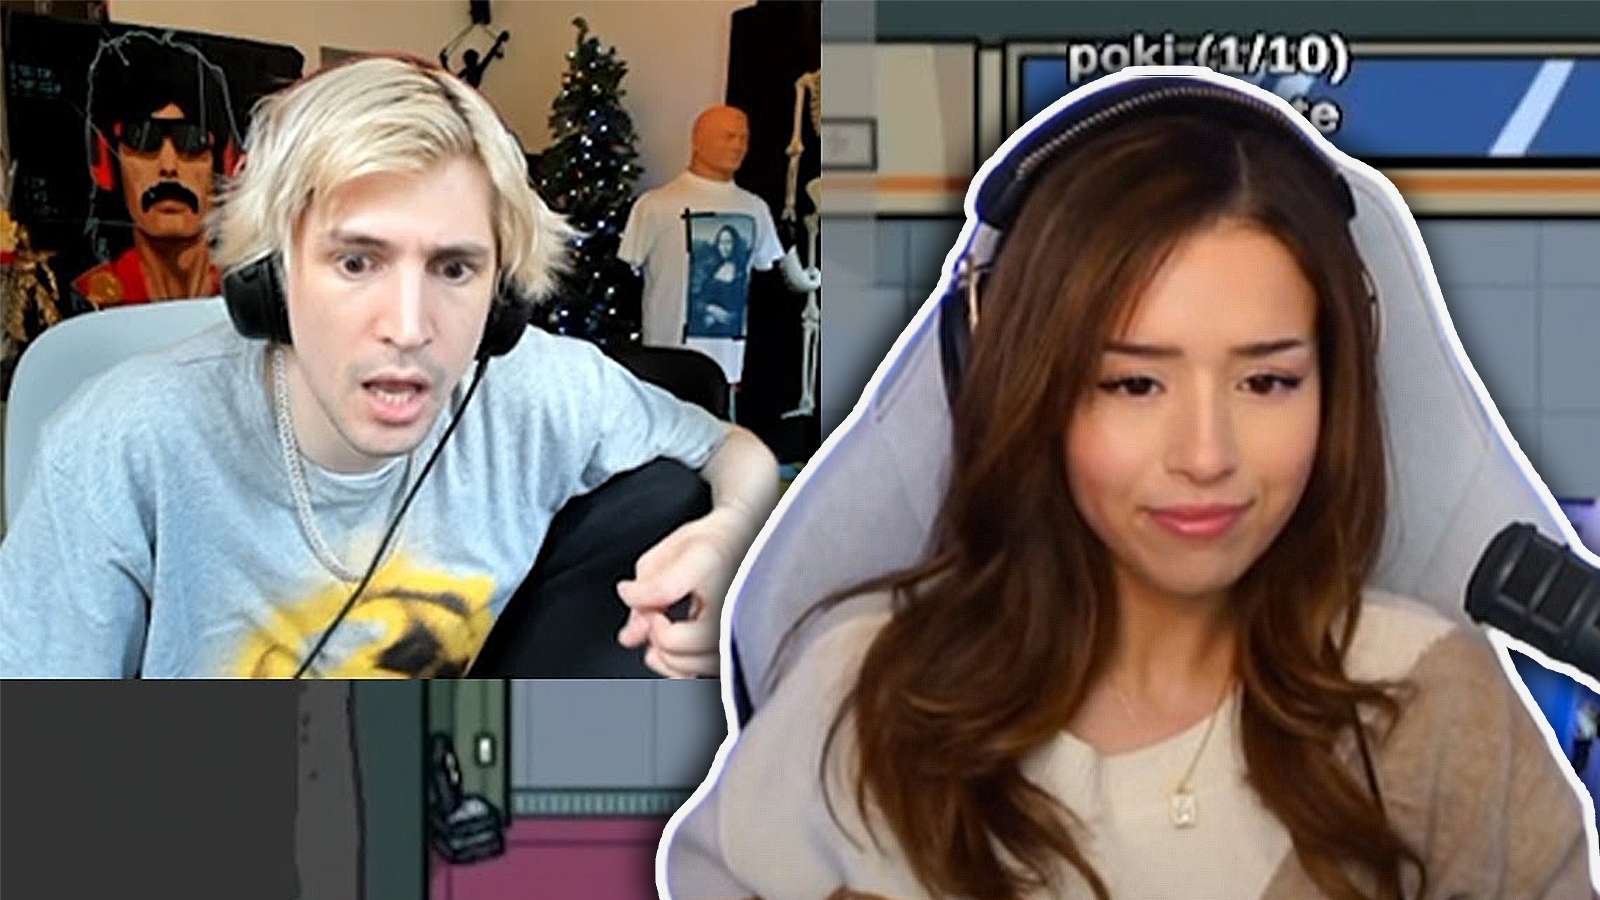 Pokimane catches xQc watching her stream and roasts his dirty room